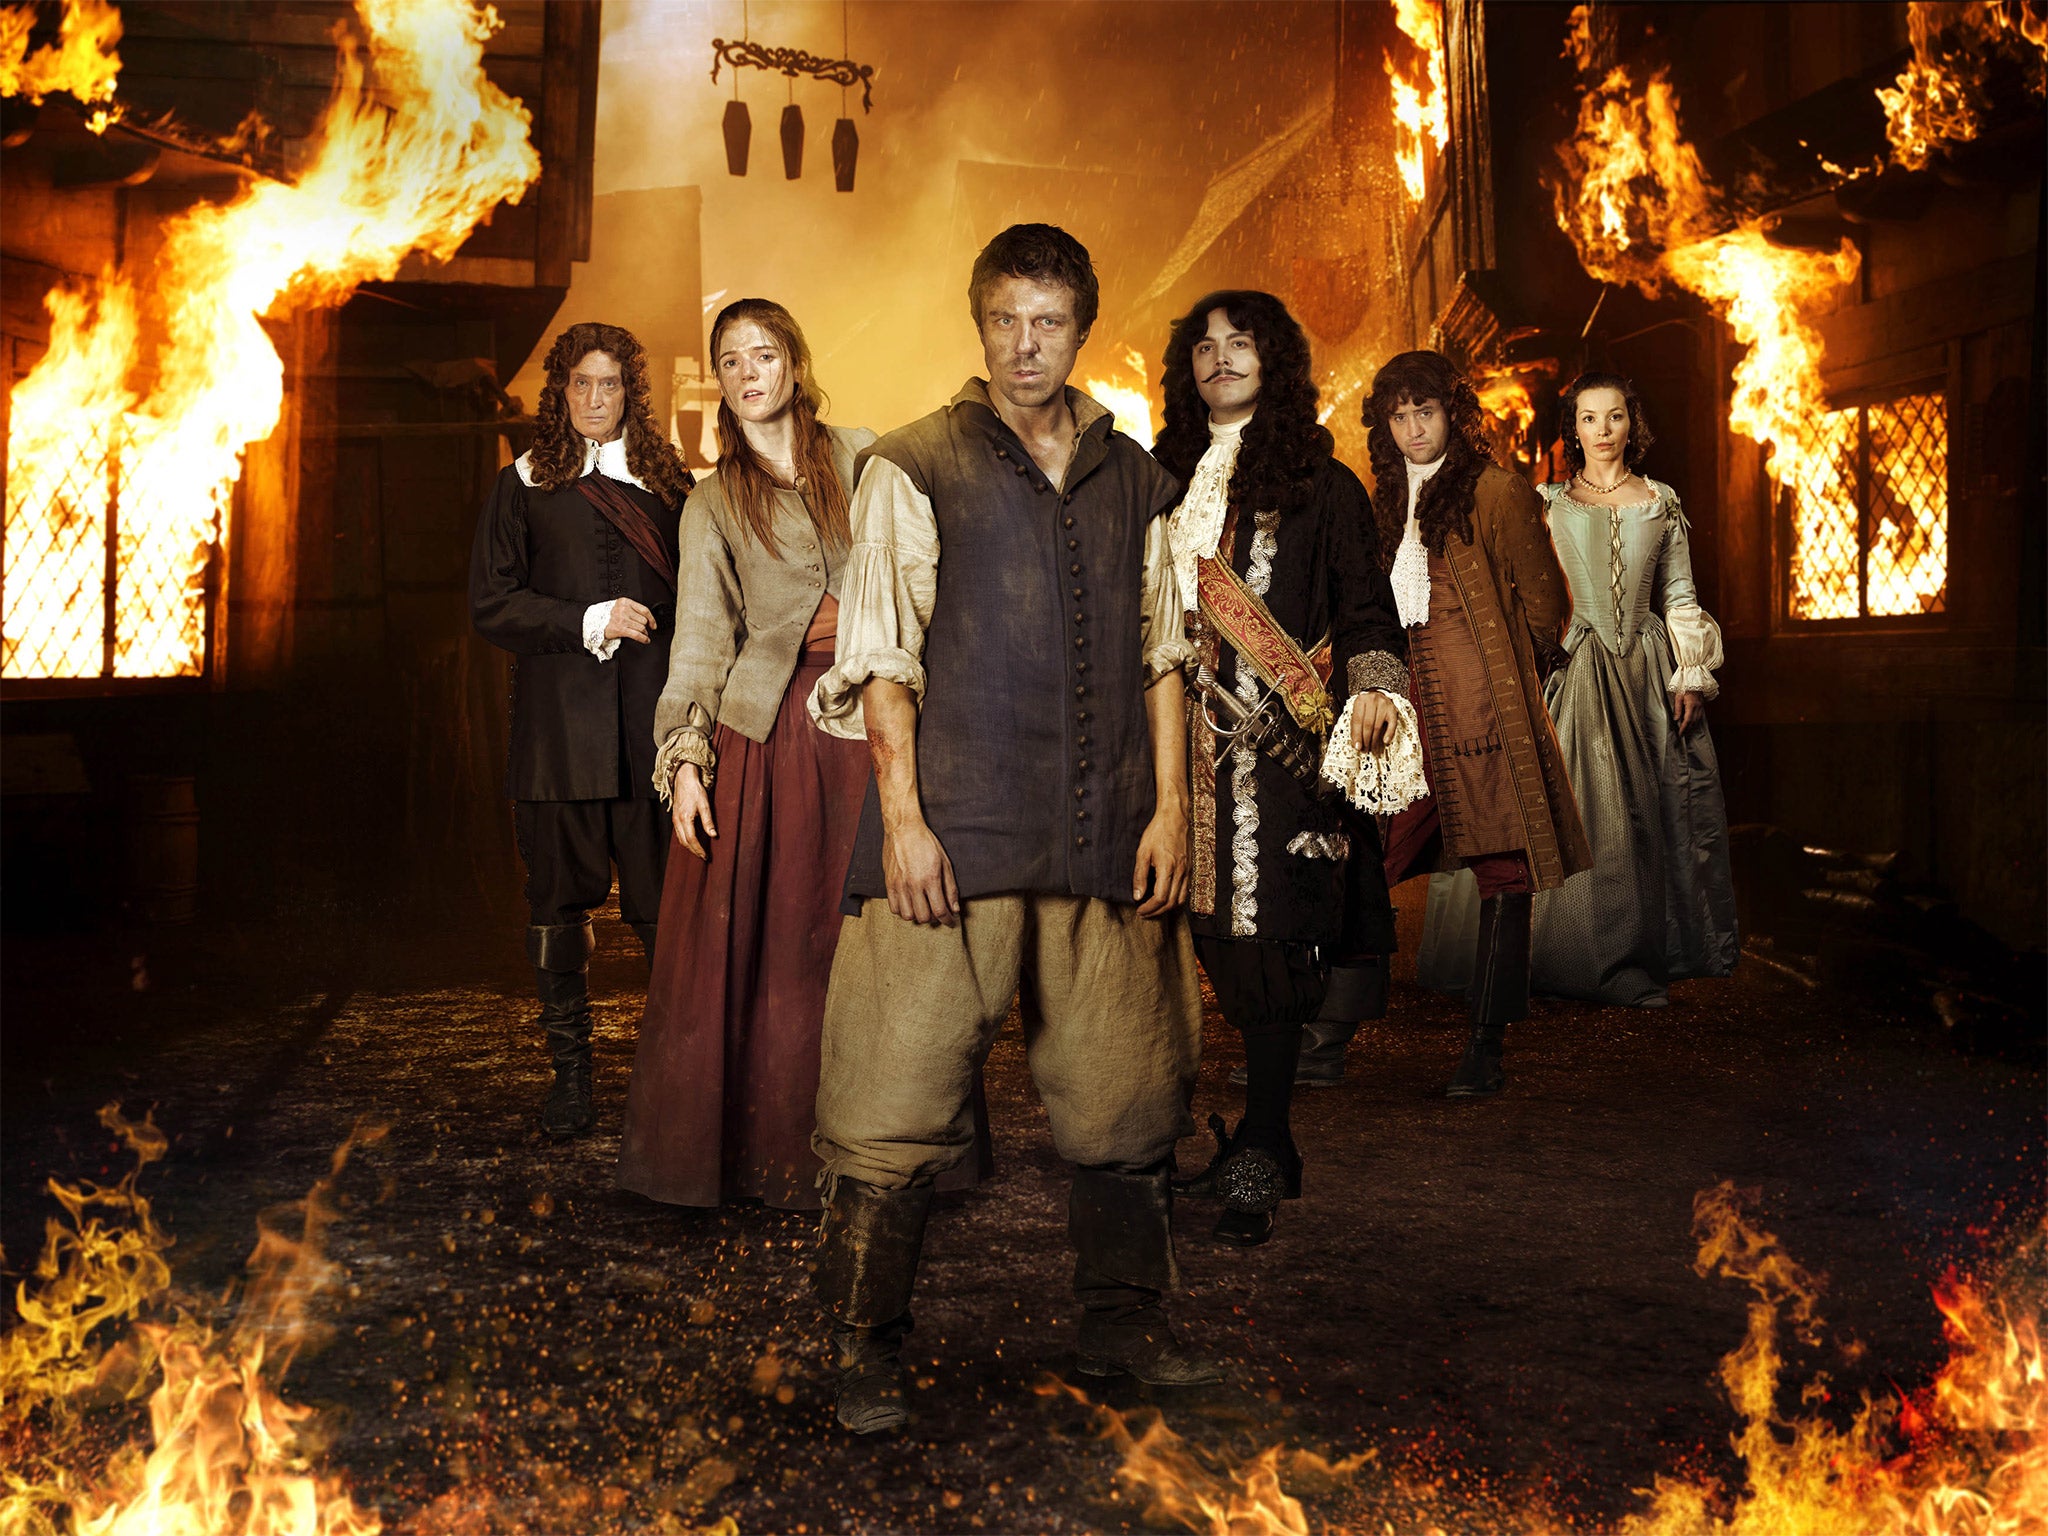 Andrew Buchan as Thomas Farriner (centre) in the new TV drama about the Great Fire of London